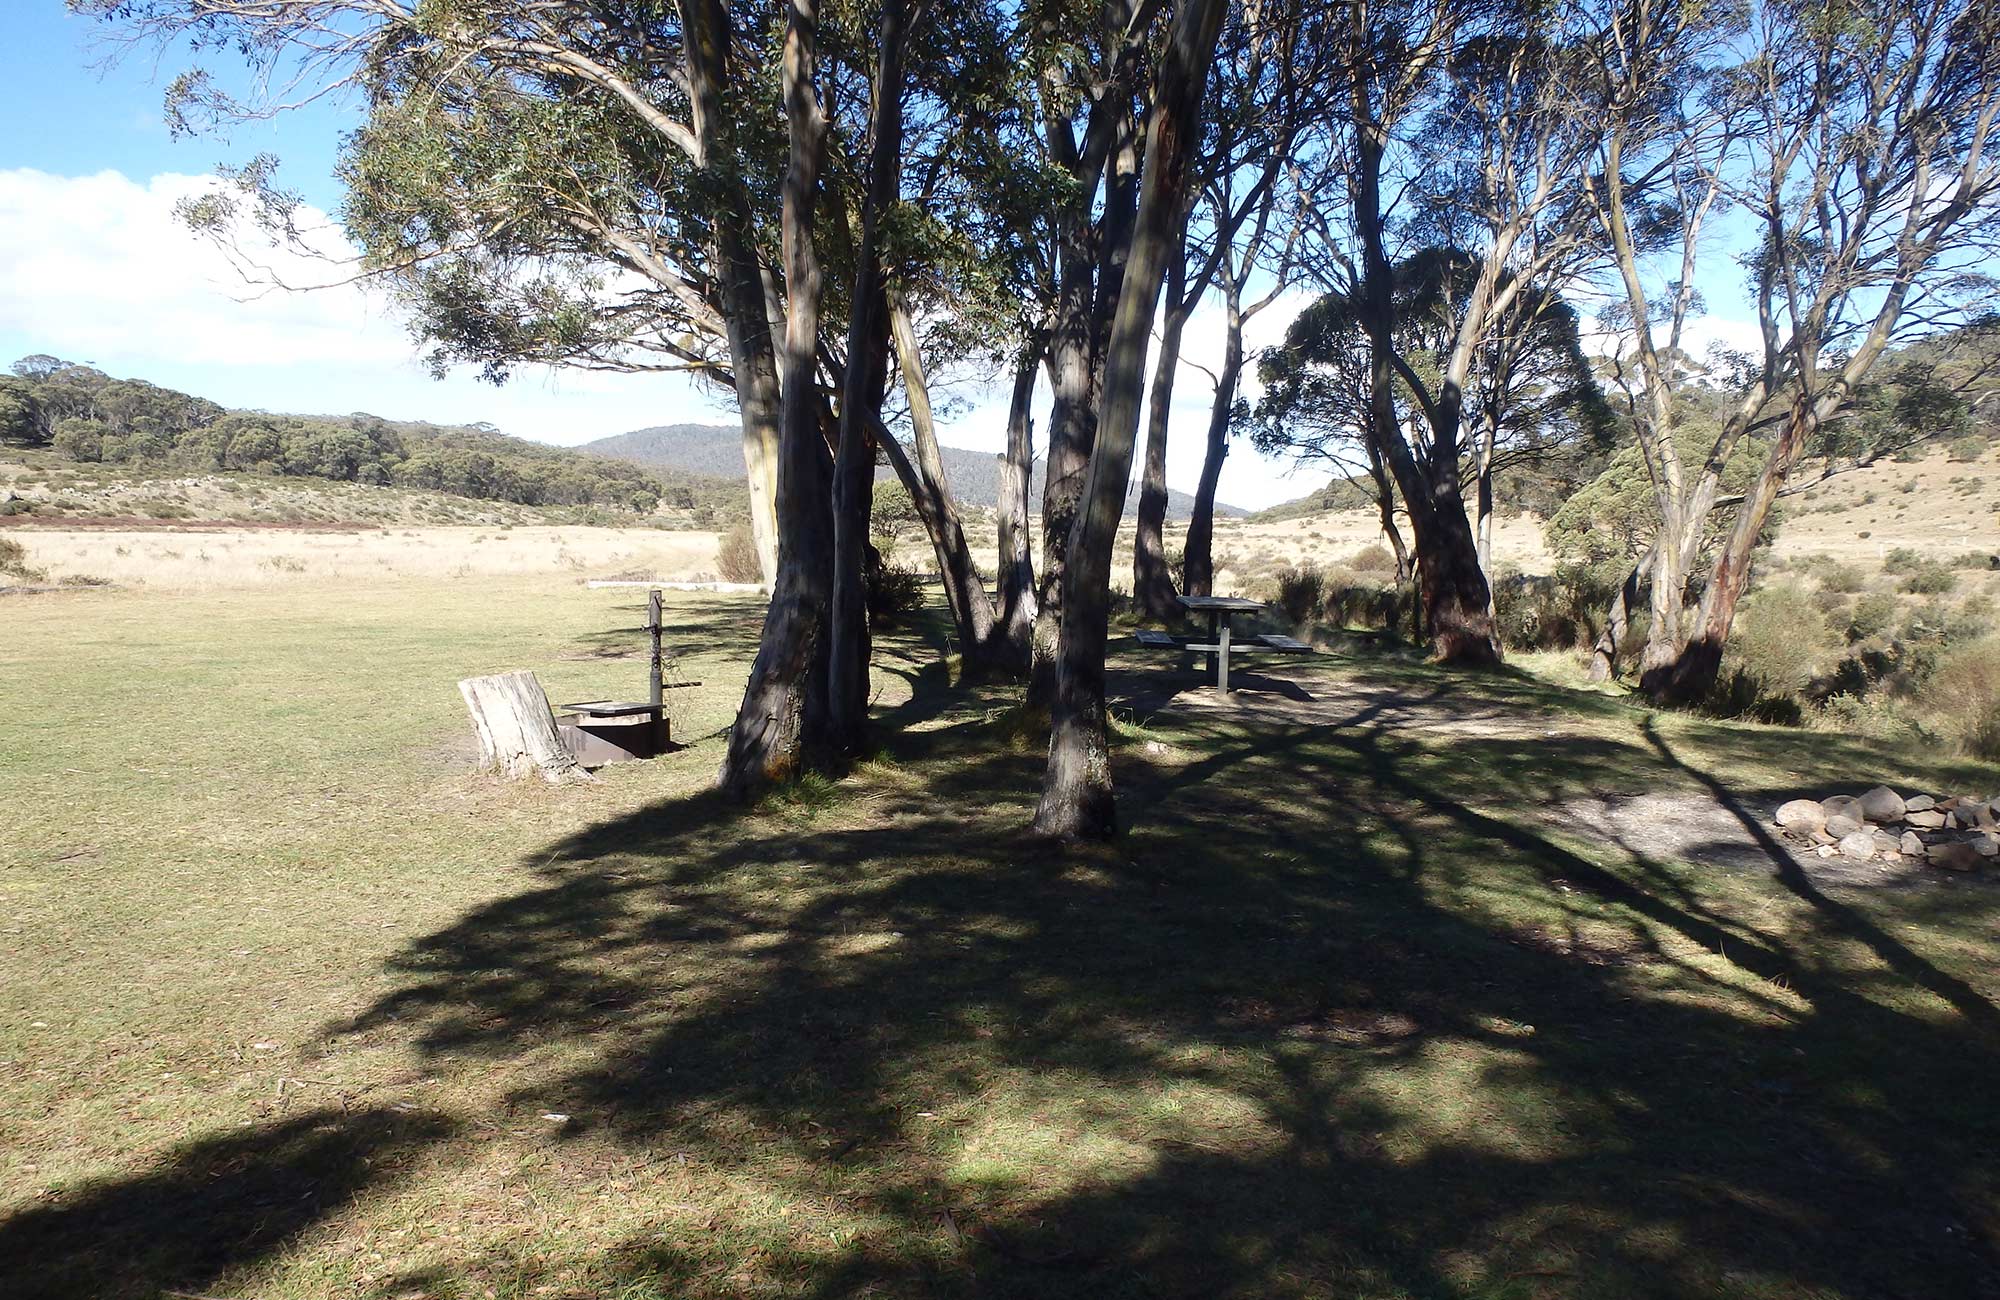 Picnic table and fire ring under trees at Gungarlin River campground, Kosciuszko National Park. Photo: Andrew Miller/OEH